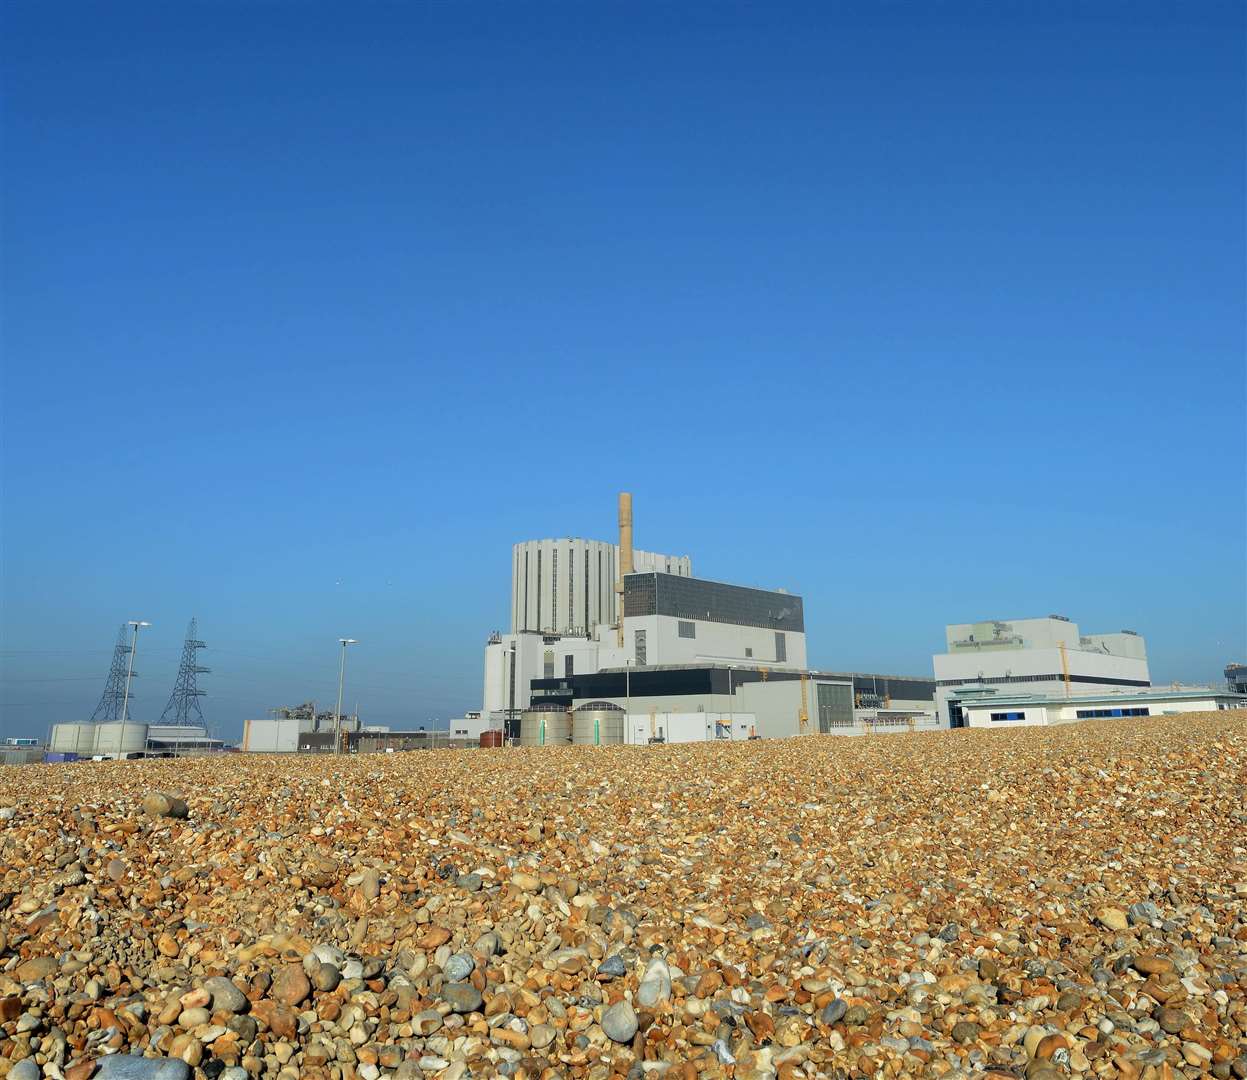 Dungeness B power station is expected to close in 2028